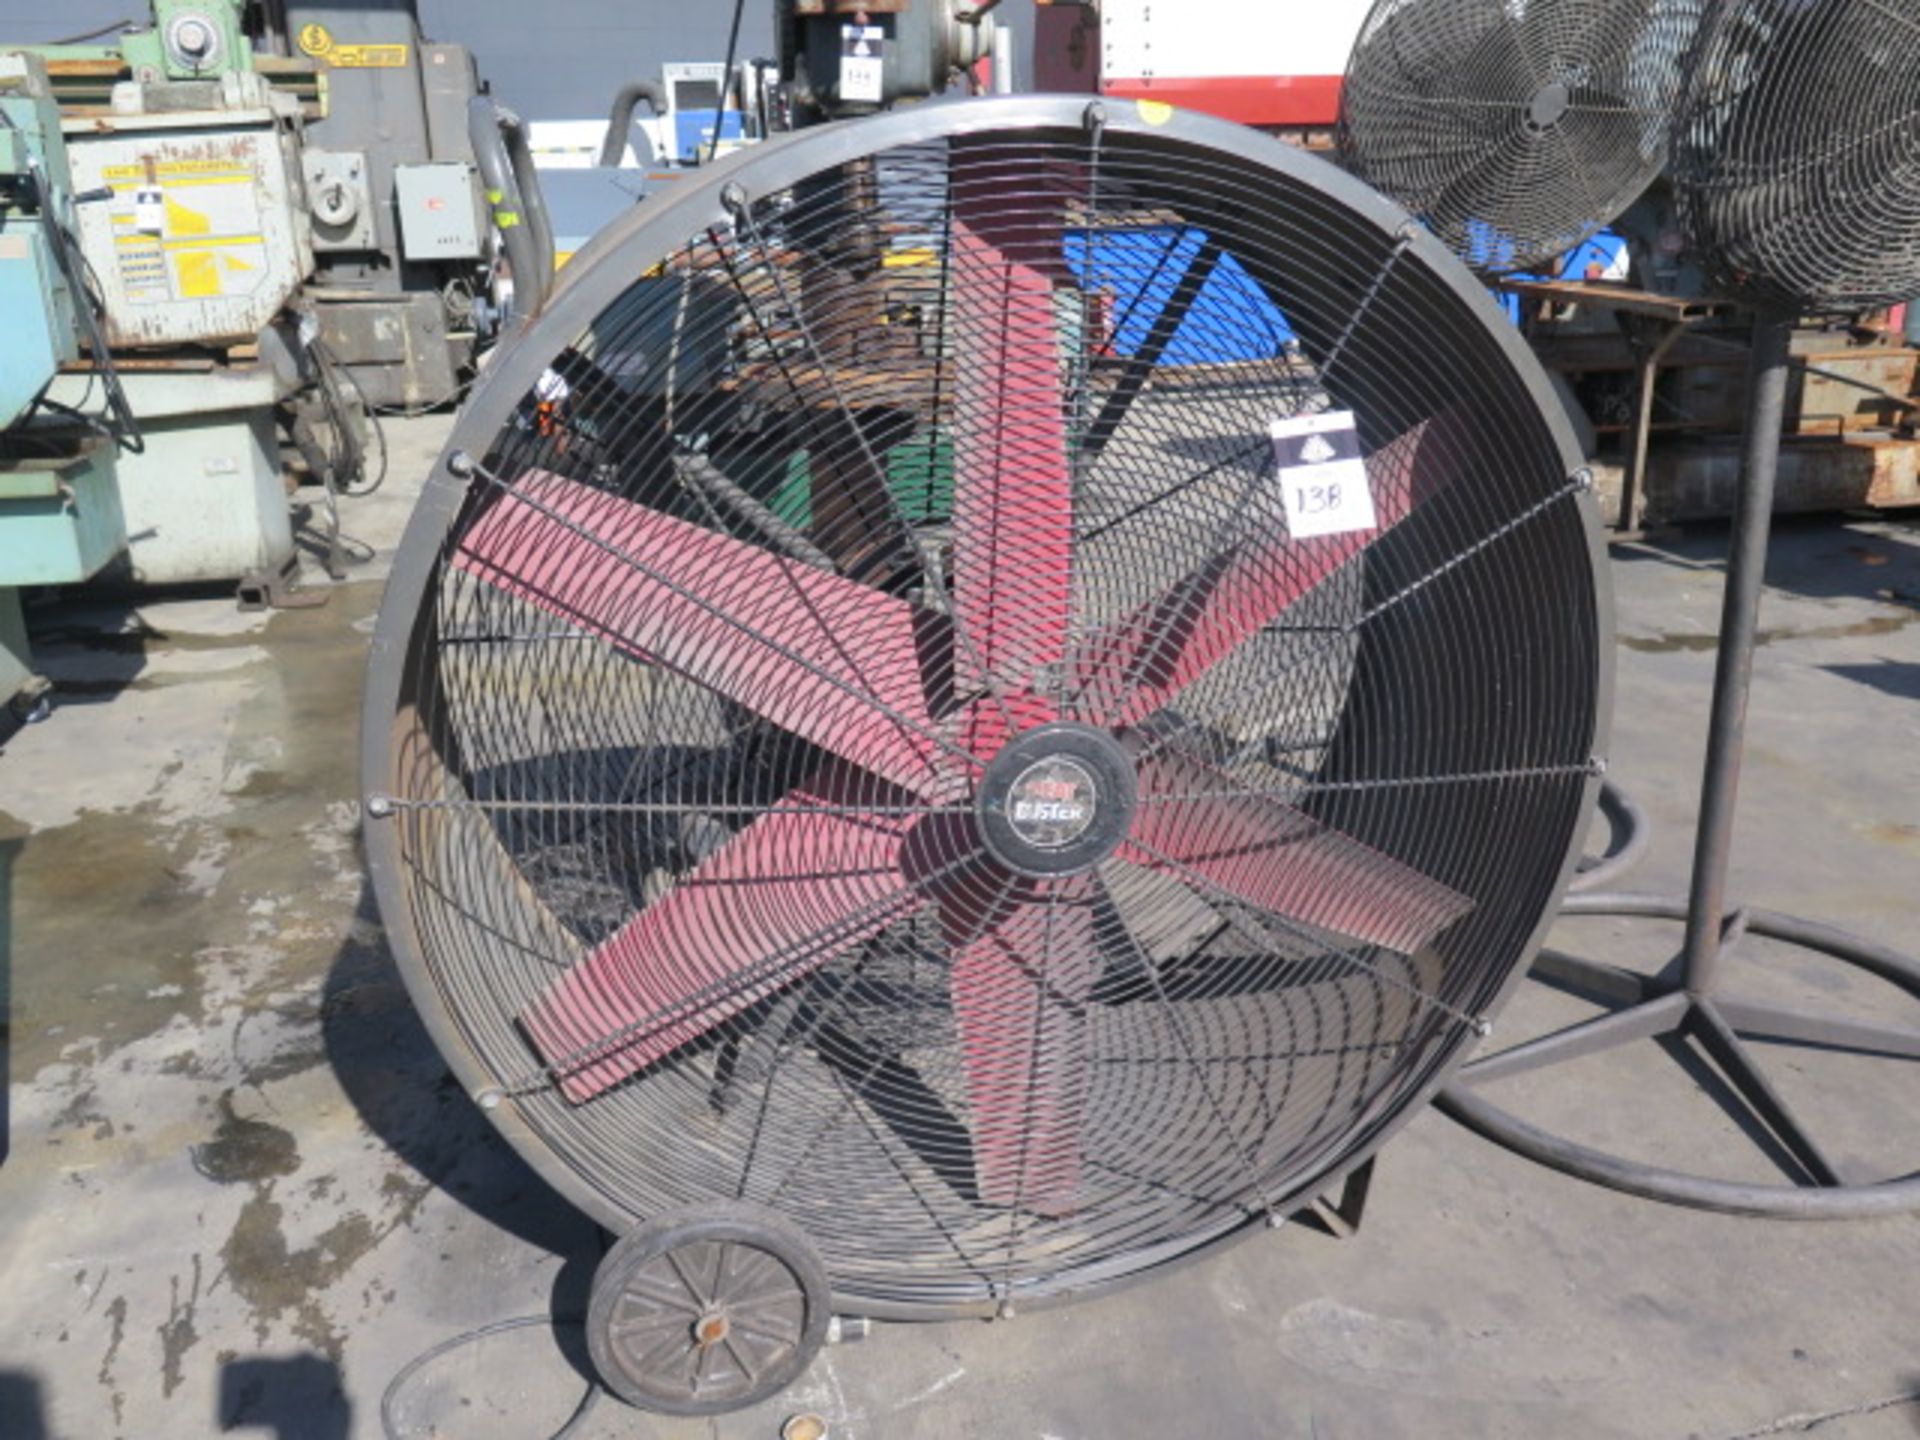 Shop Fans (3) (SOLD AS-IS - NO WARRANTY) - Image 2 of 6